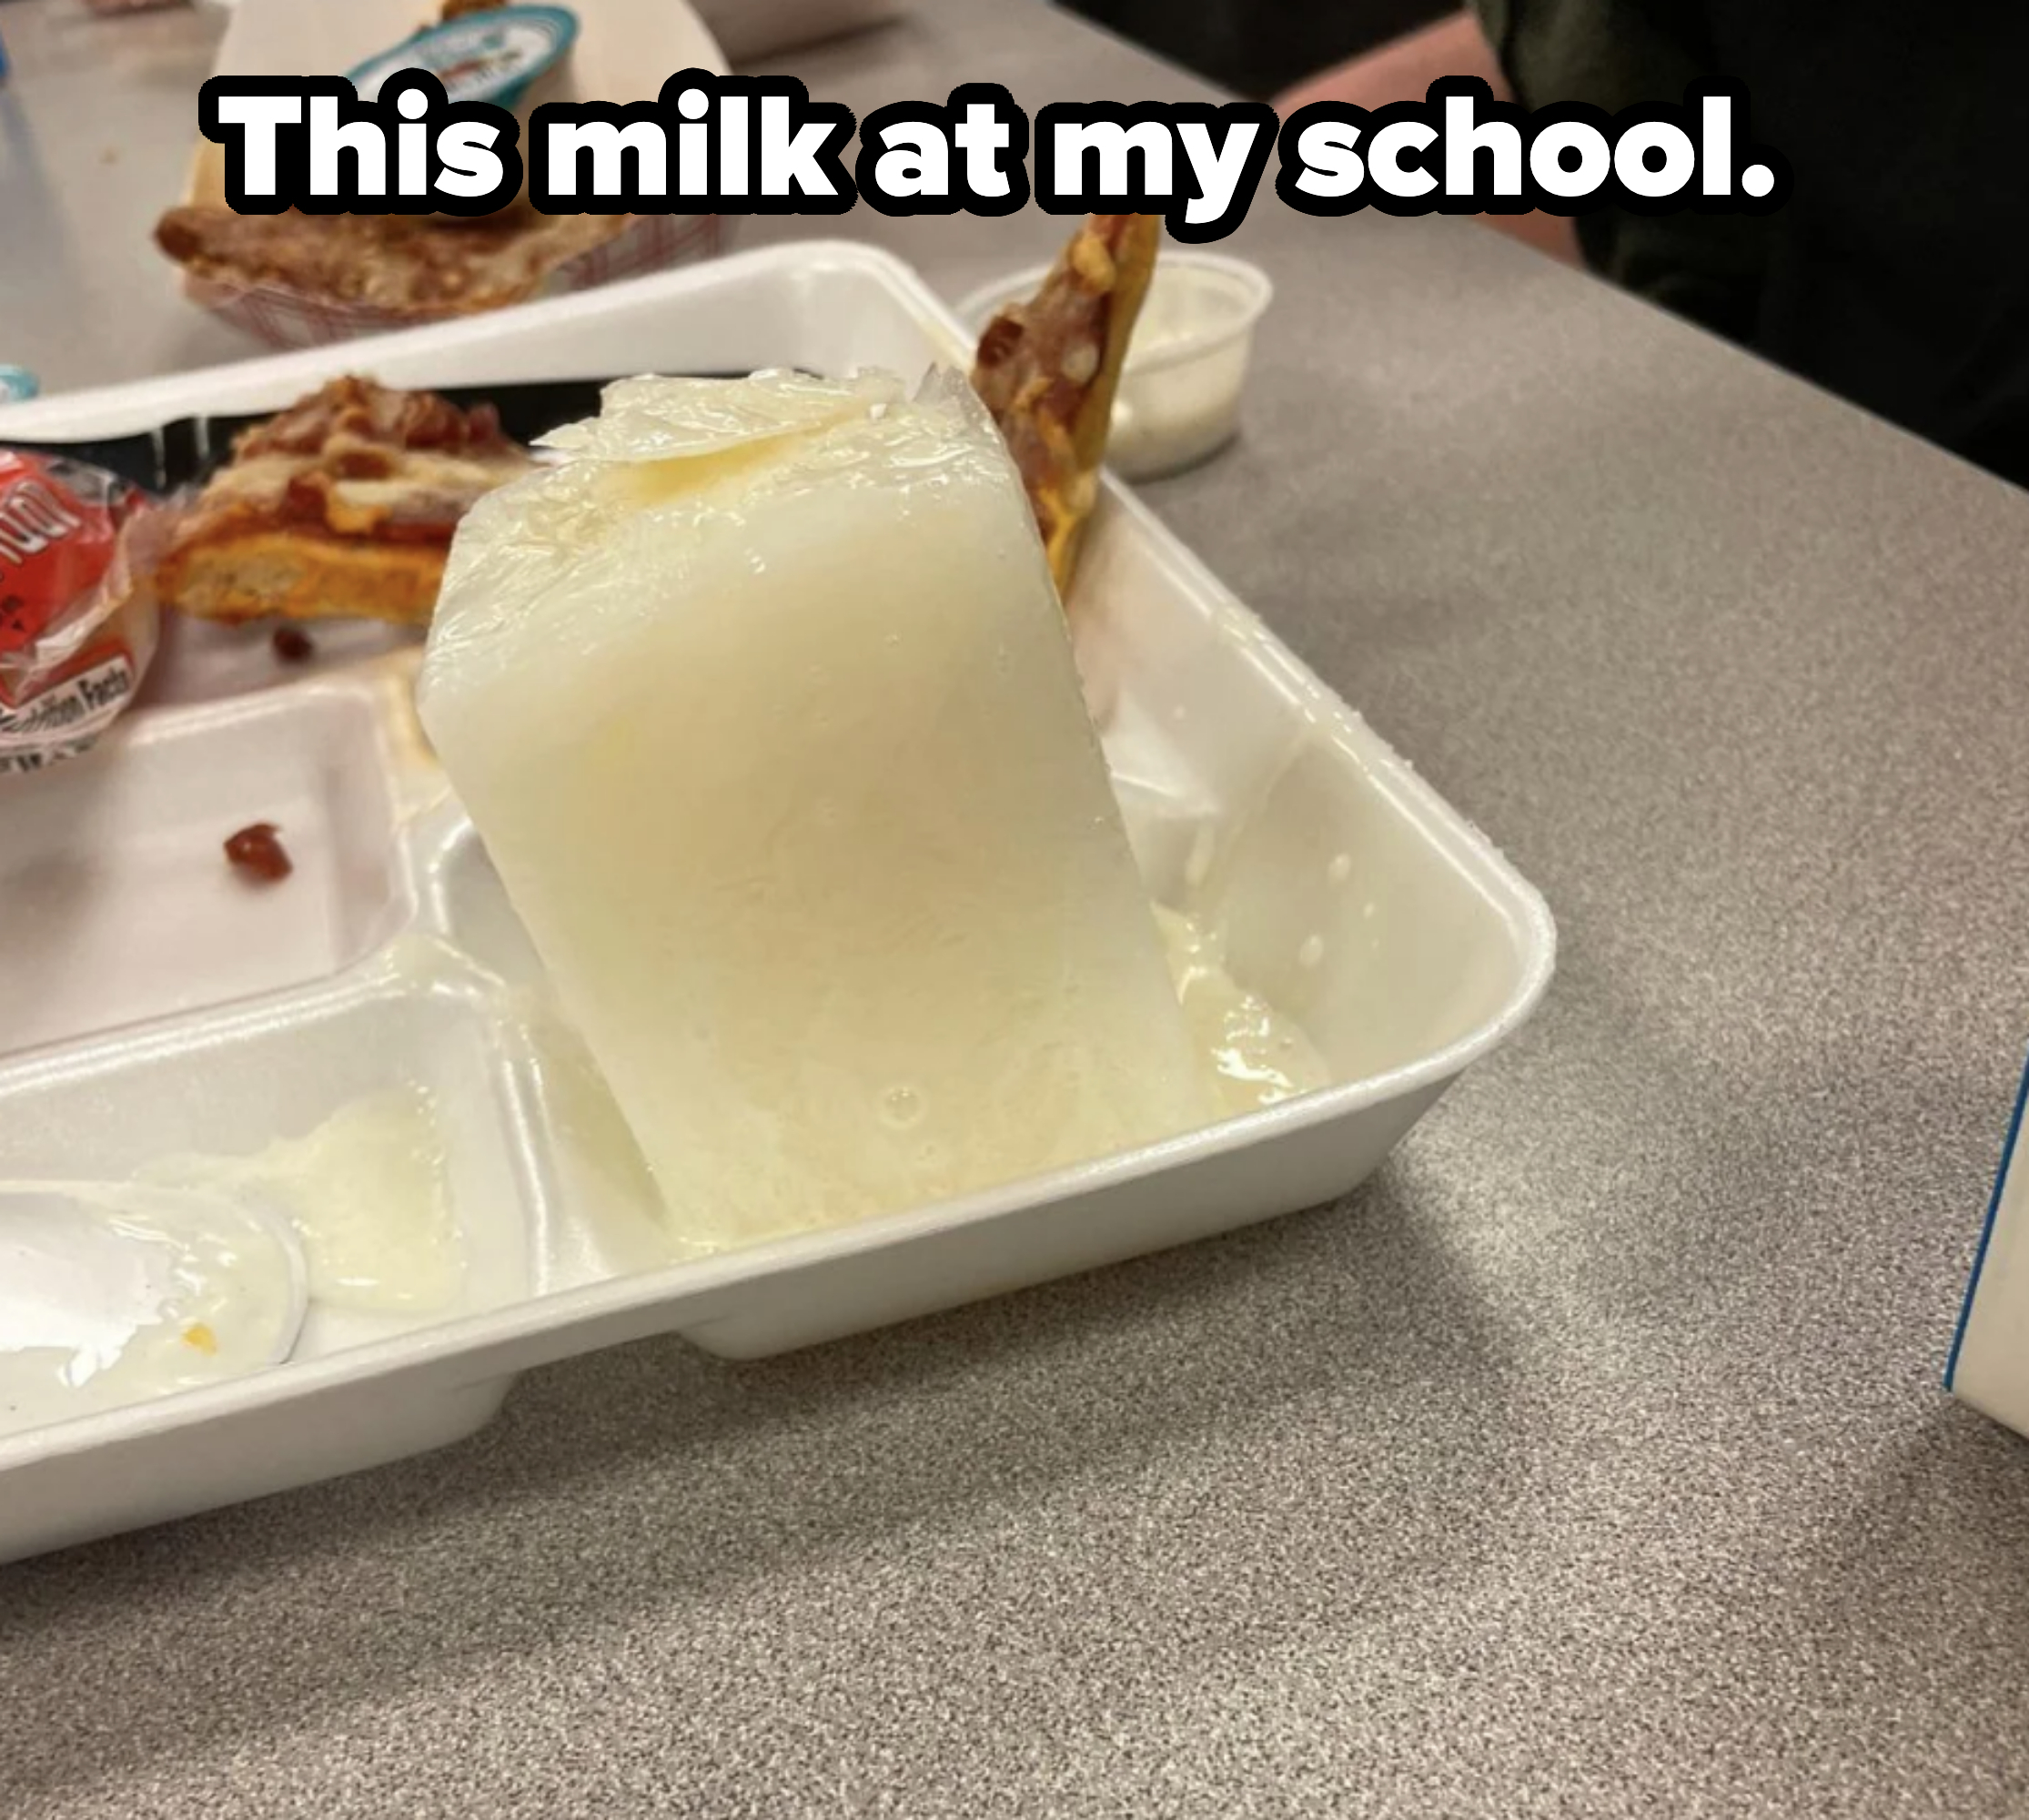 A school lunch tray with a partially melted milk block, pizza slice with bacon, marinara sauce cup, and a container of dipping sauce